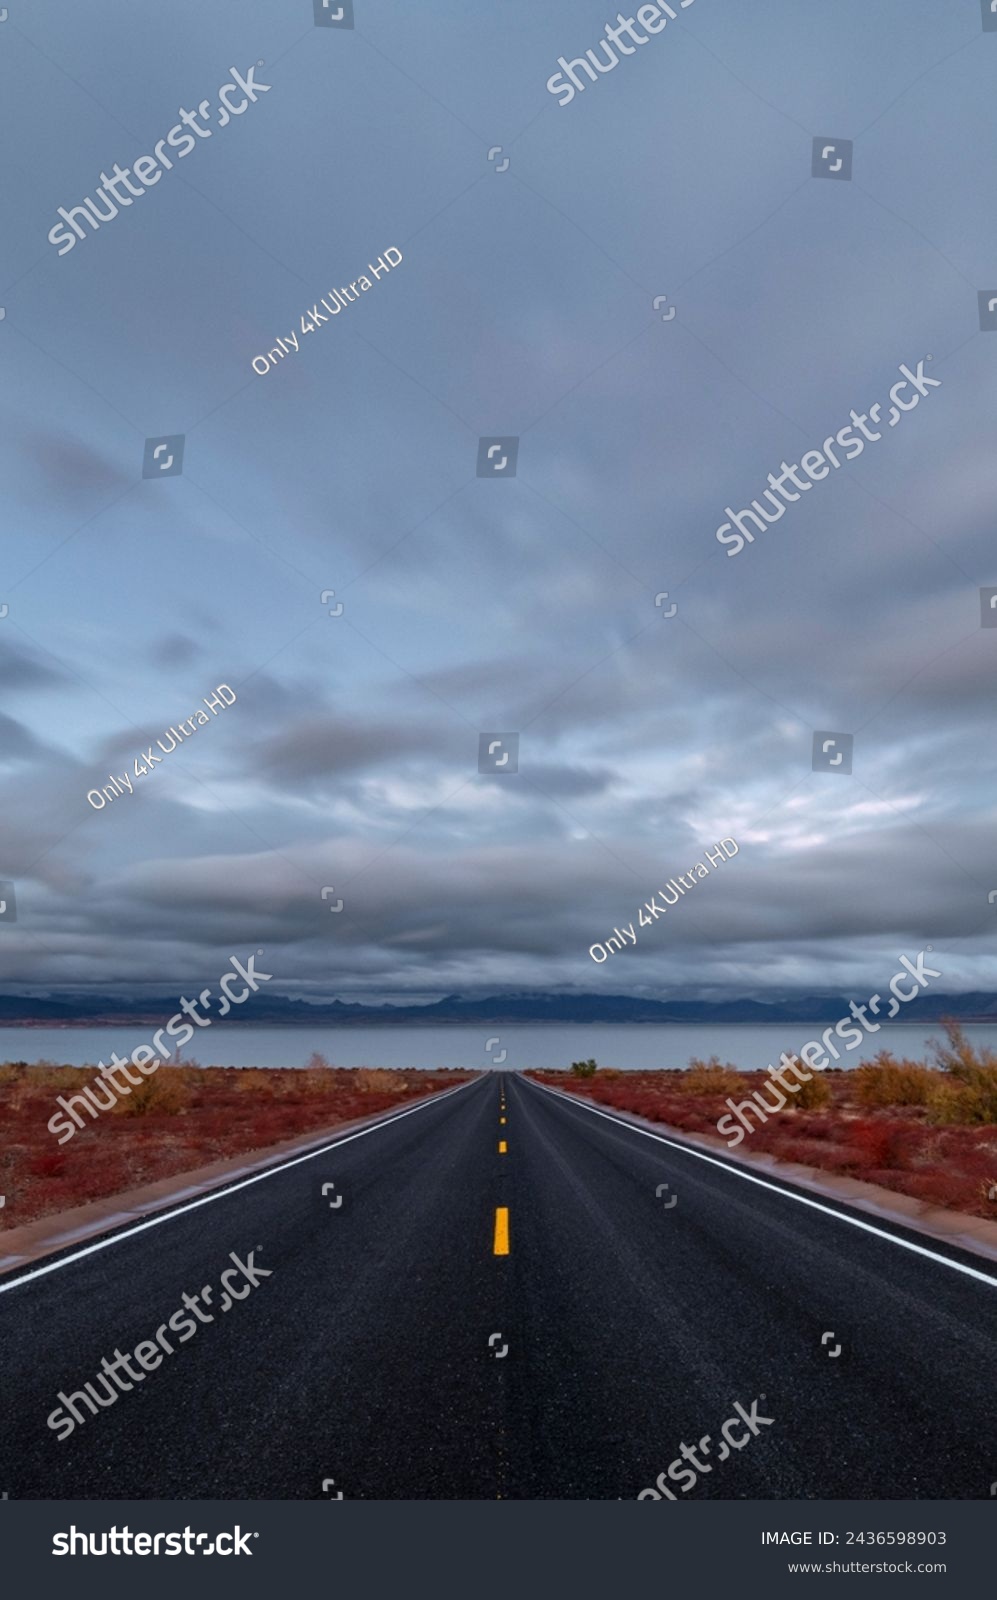  Spectacular Sunset: 4K Ultra HD Image of Desert Road to Lakeshore with Clouds at Sunset #2436598903